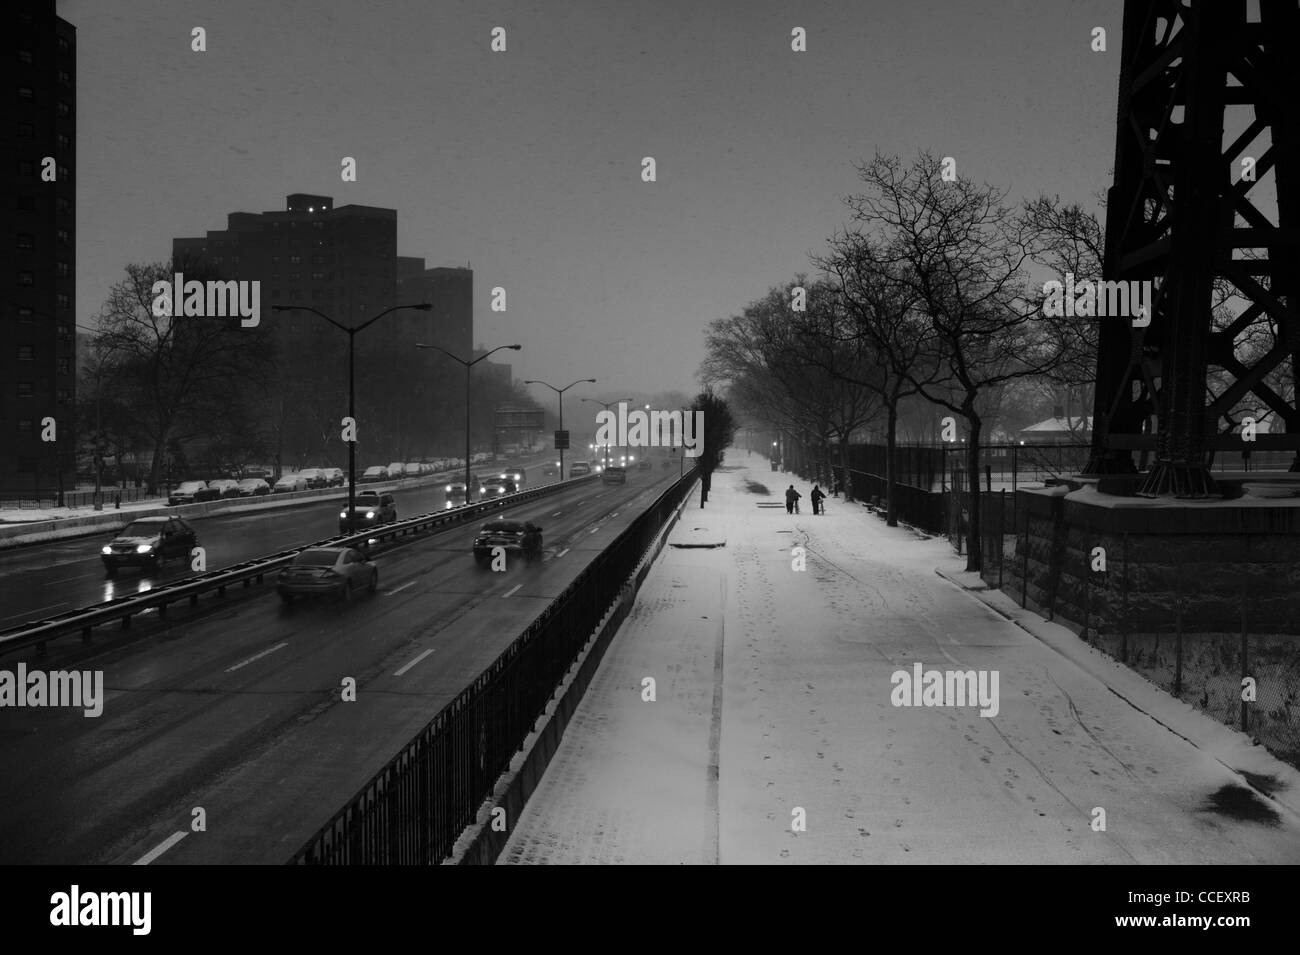 January 21st 2012: Snow seen falling on the FDR Drive highway in New York City, USA. Stock Photo